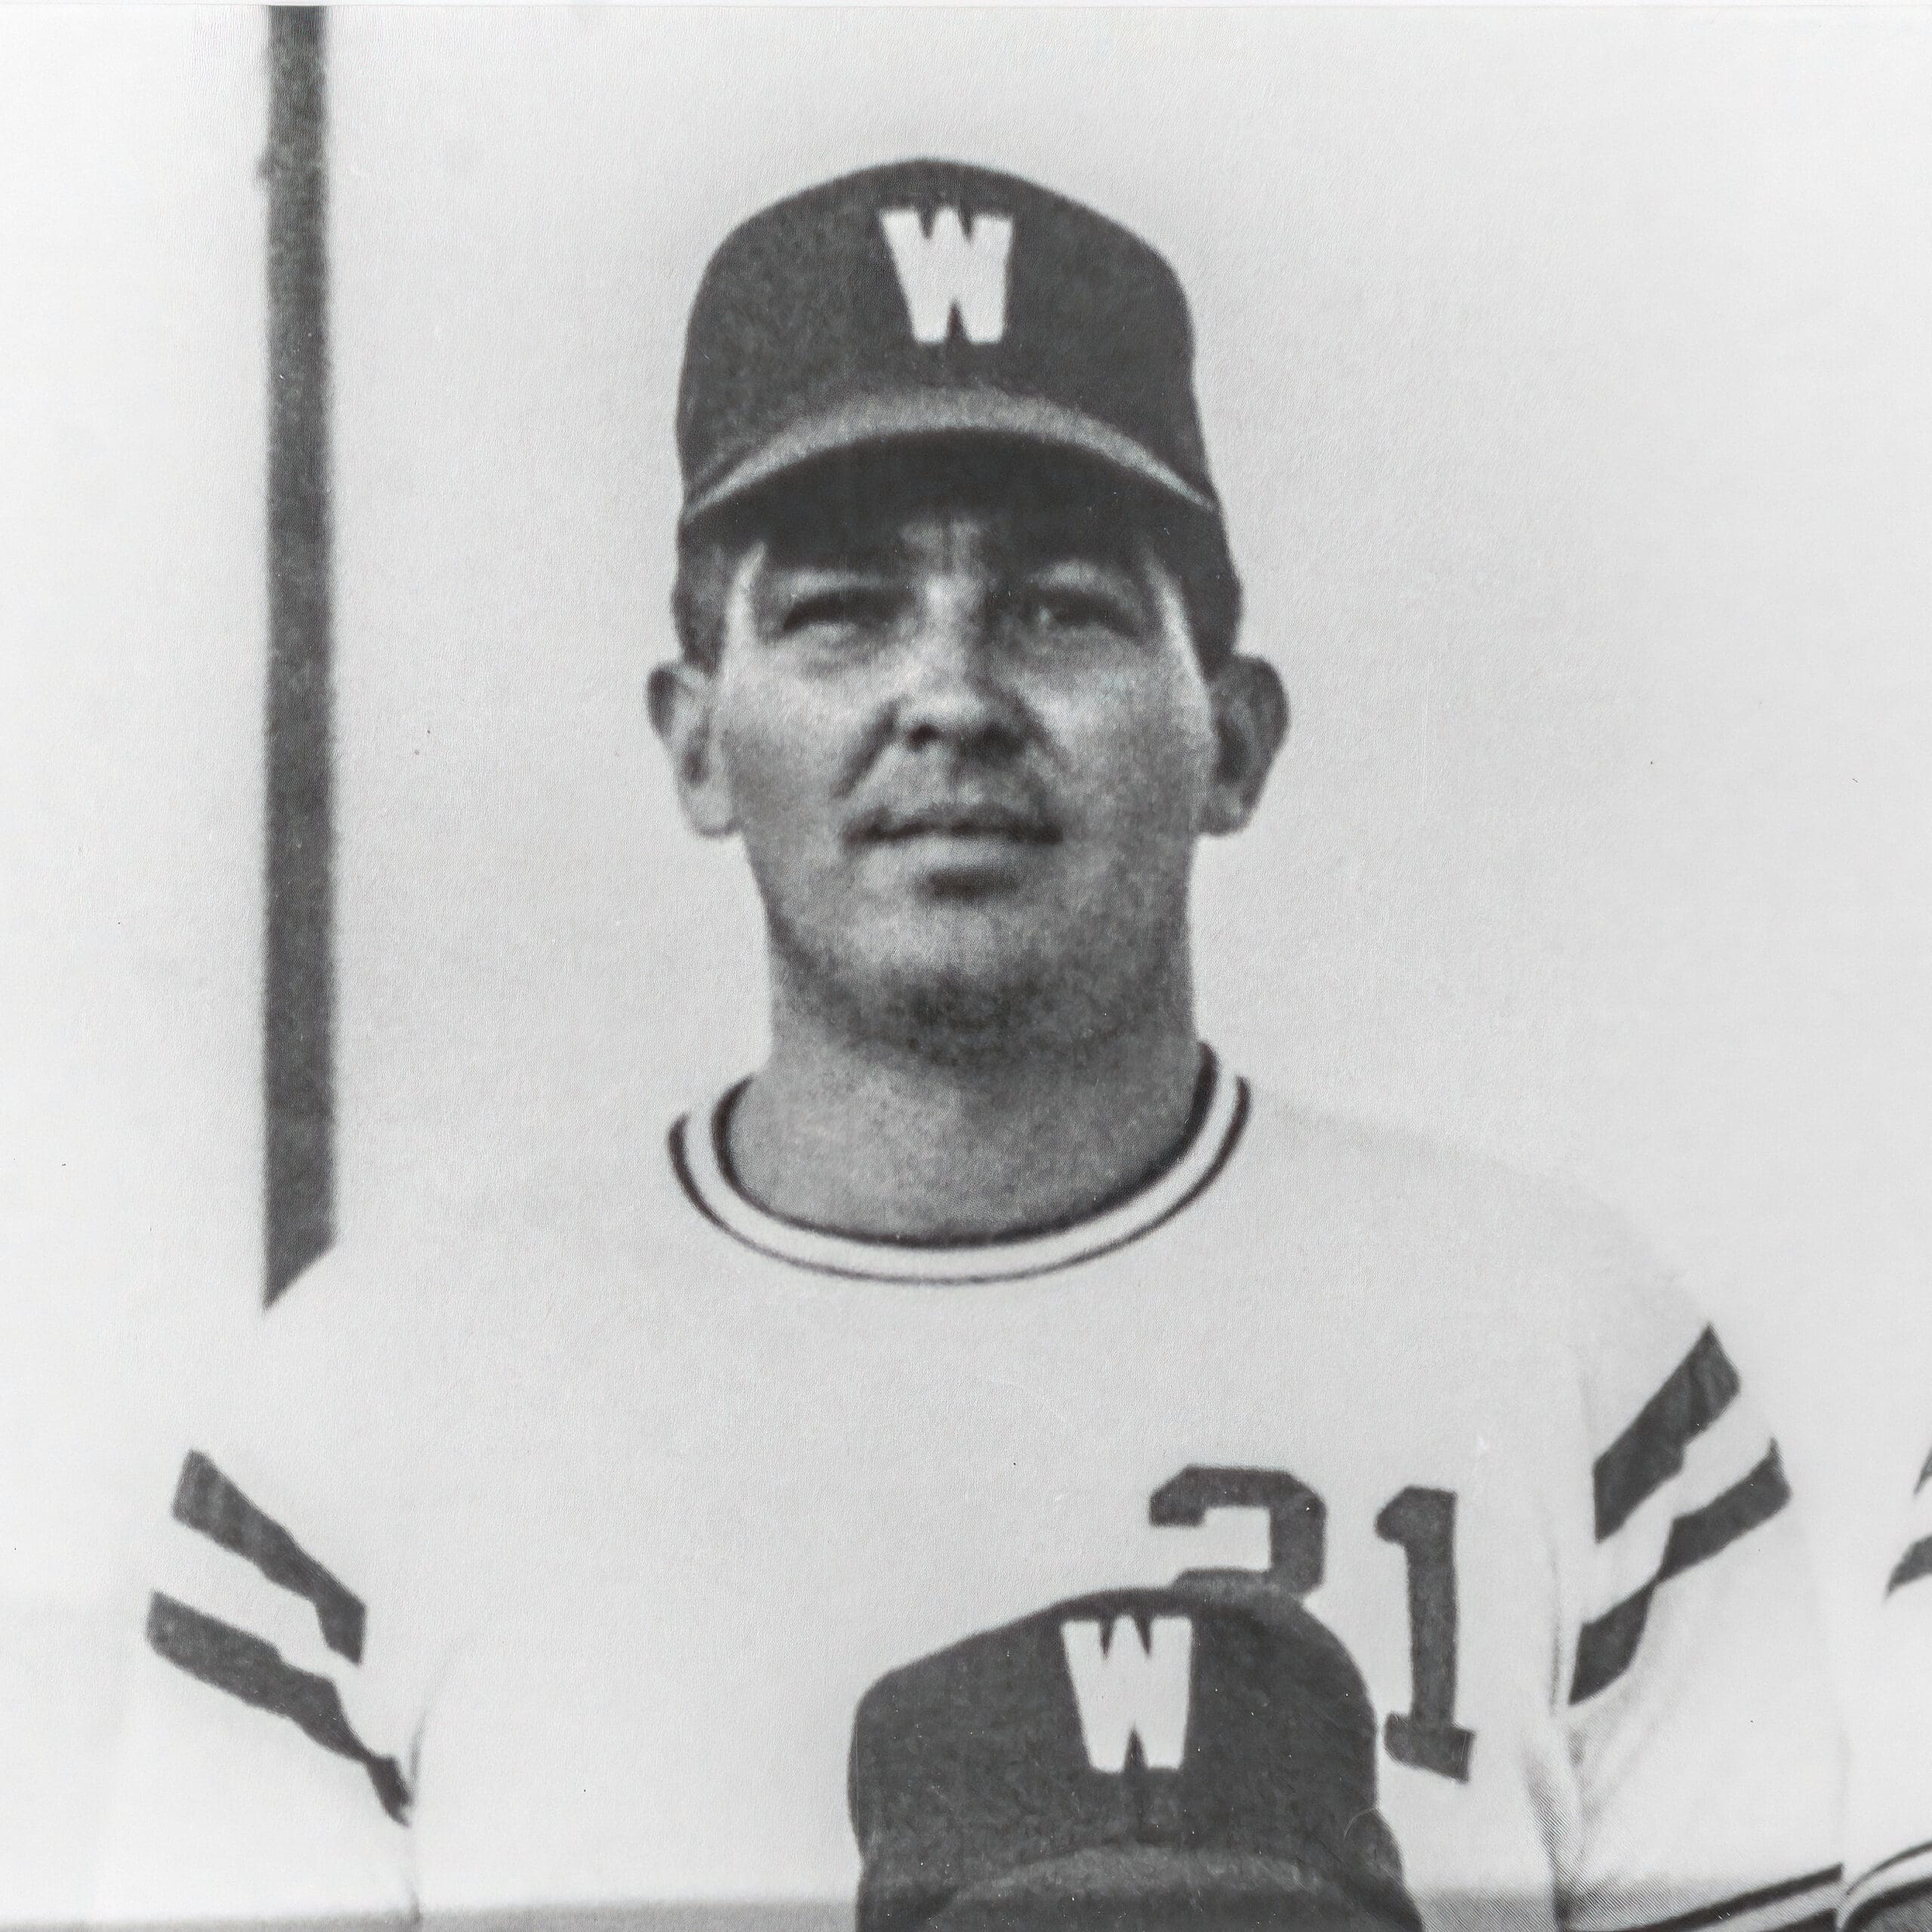 Jack L. Brown: 1985 Medford Sports Hall of Fame Inductee